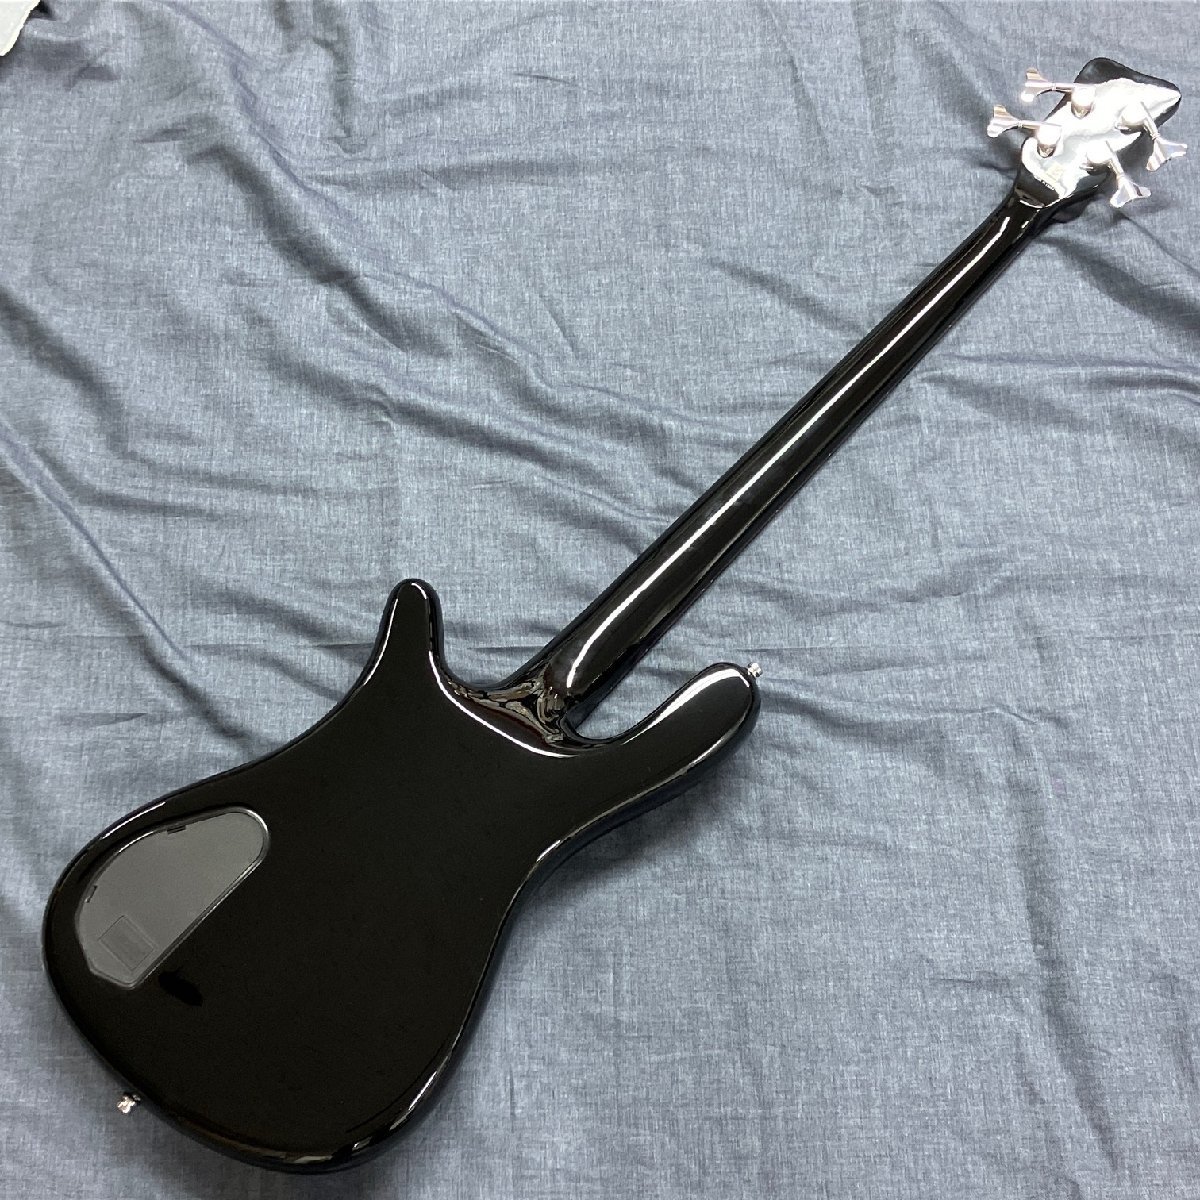 Warwick Warwick RockBass Streamer NT 4st SHP(Solid Black High Polish)s Roo neck structure outlet special price 